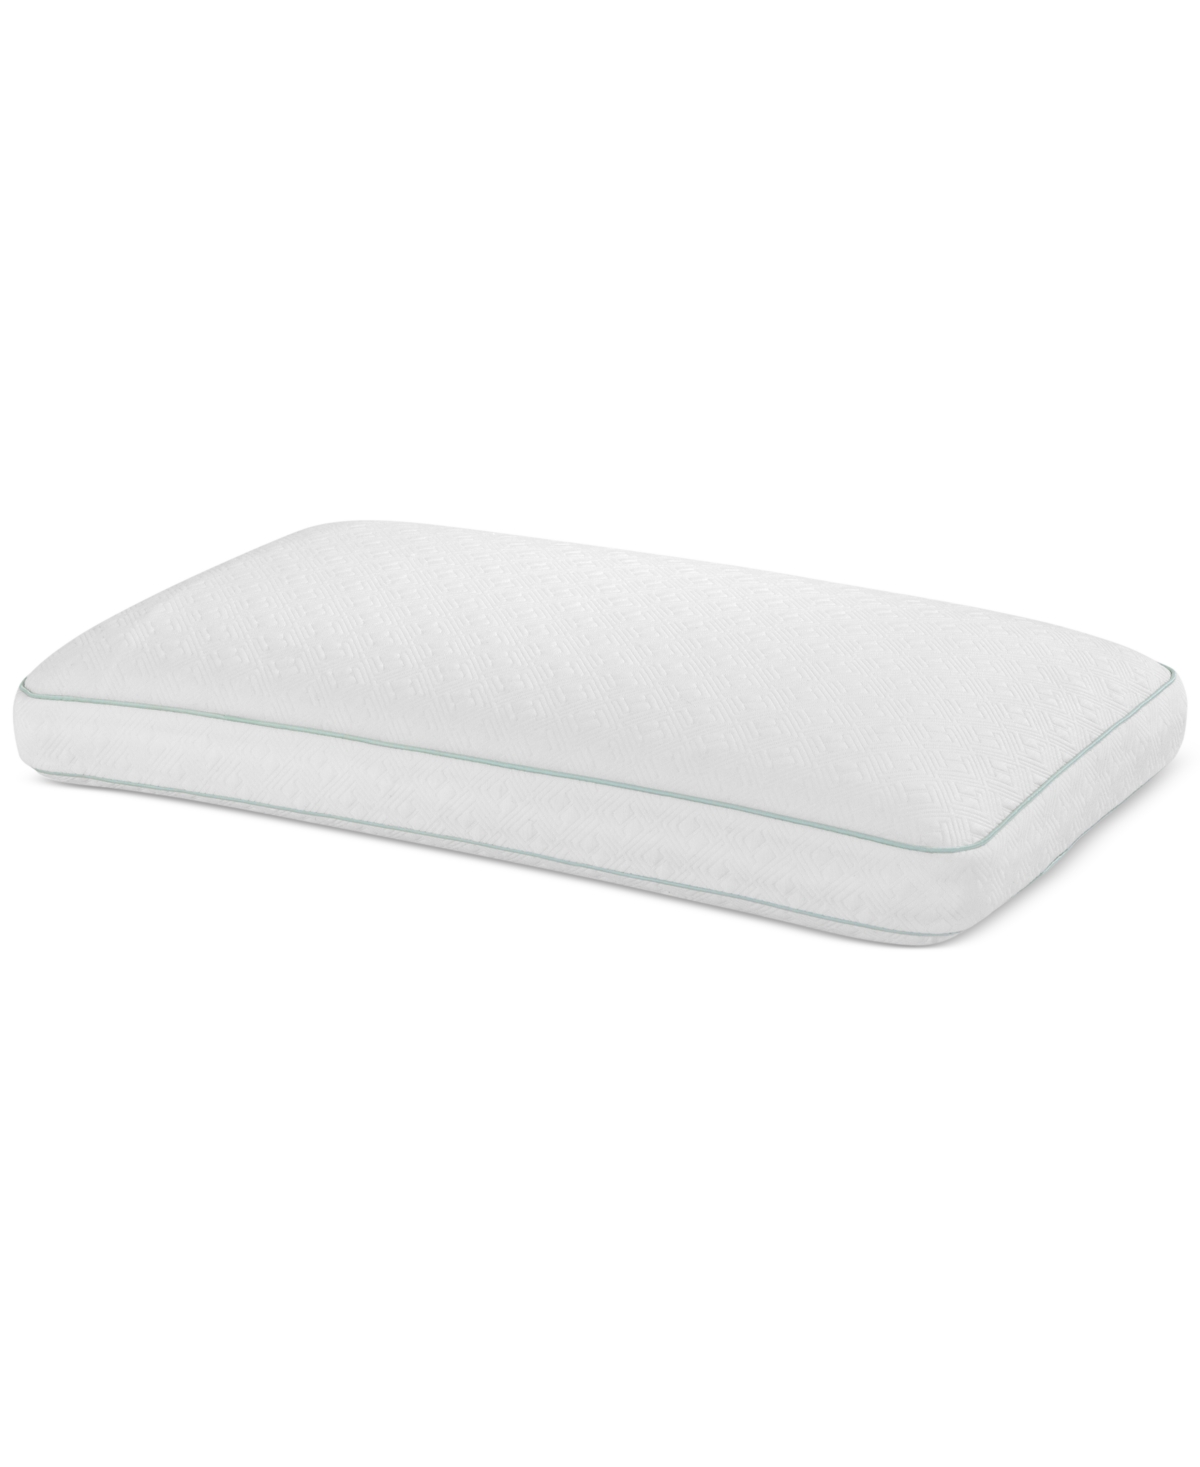 Intellisleep Natural Comfort Traditional Memory Foam Pillow, Queen, Created For Macy's In White With Green Cording